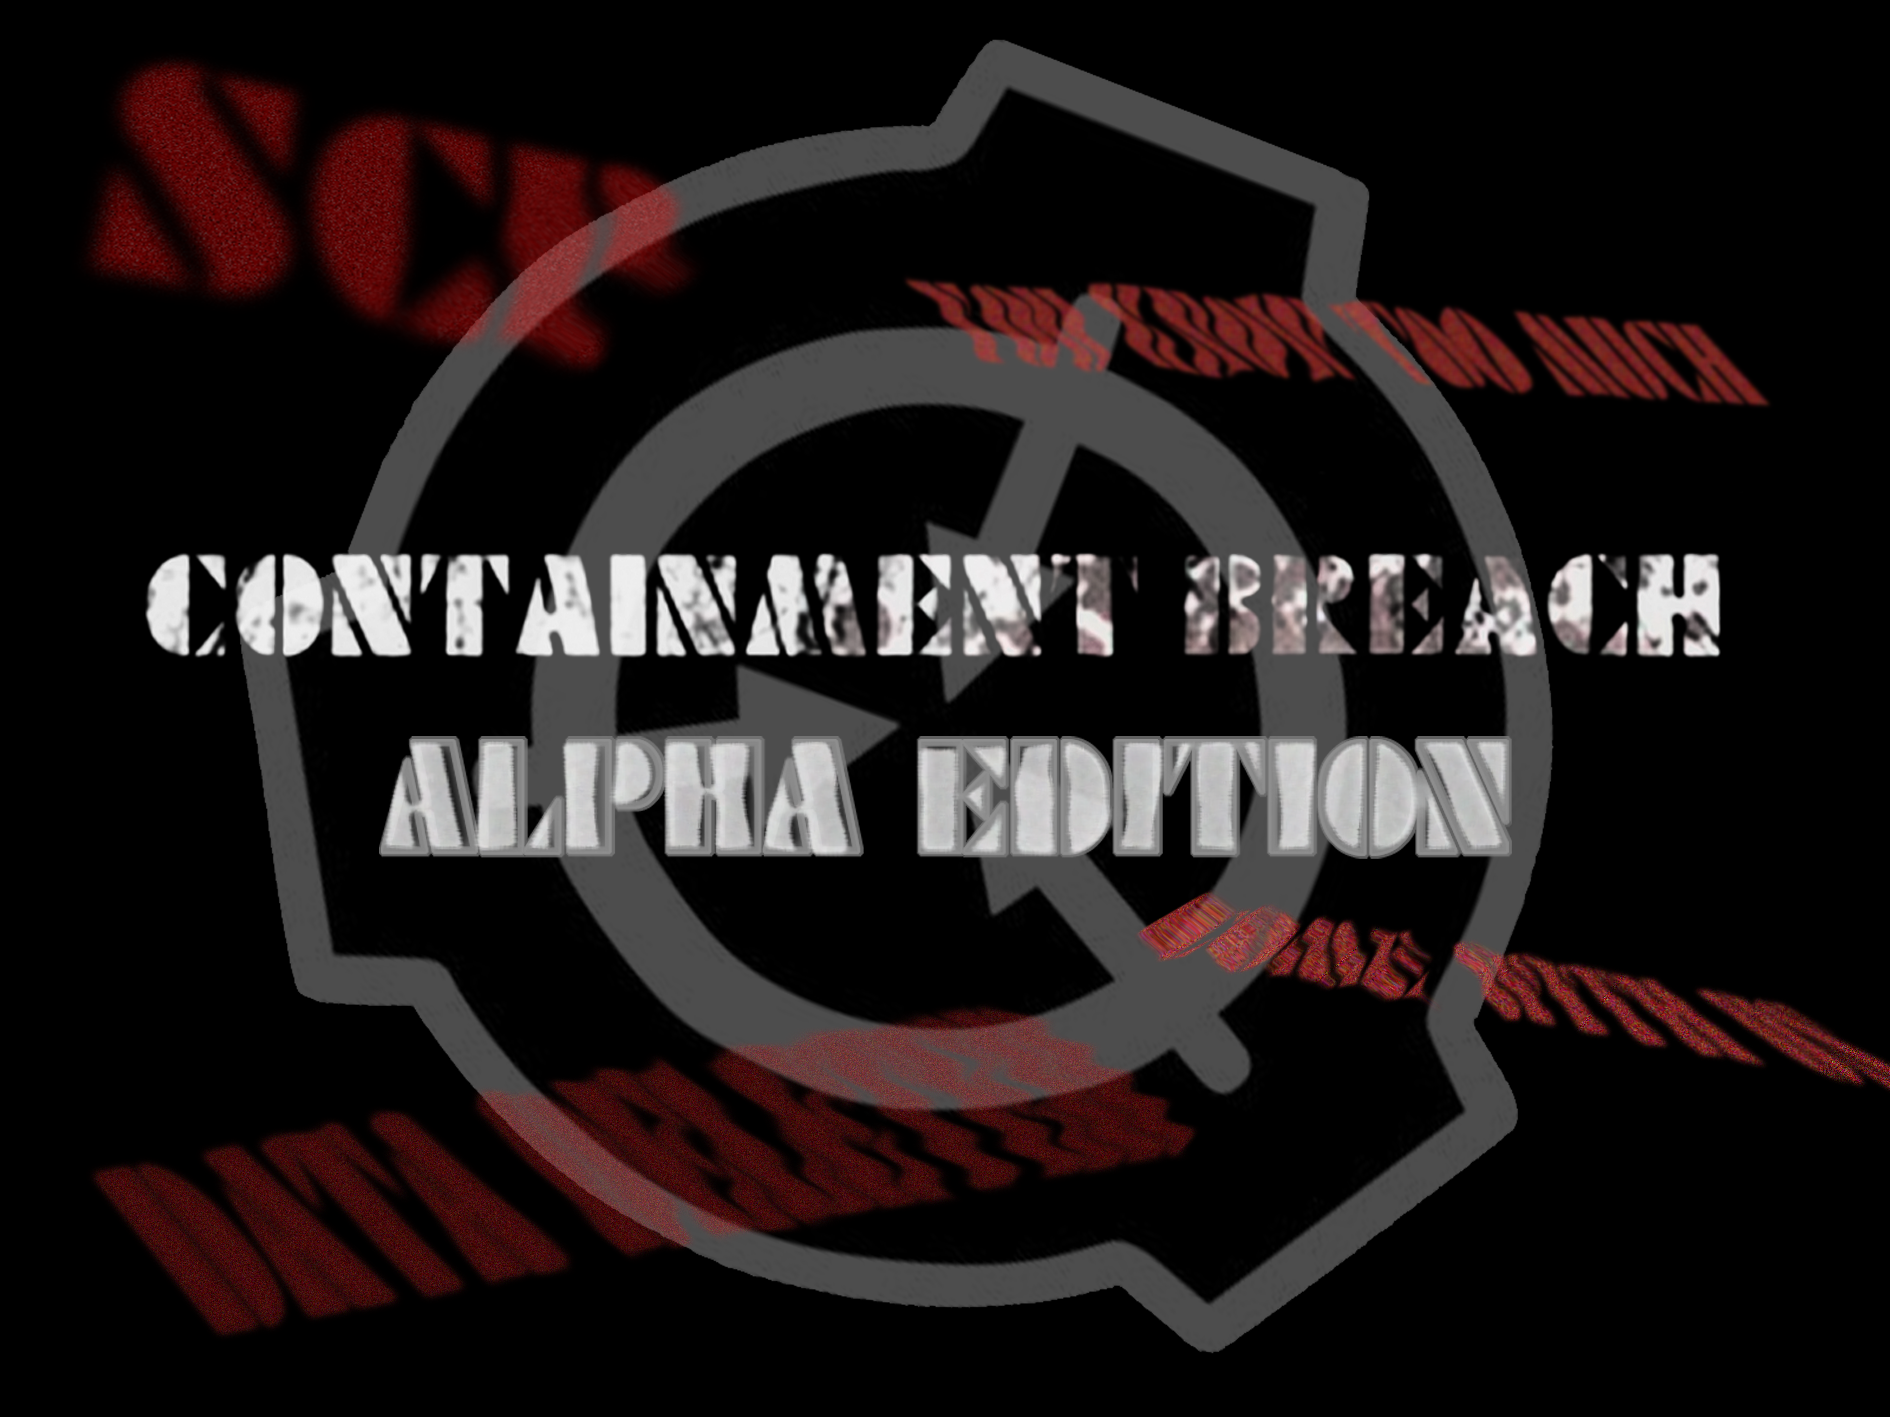 SCP - Backstories (ALPHA) mod for SCP - Containment Breach - ModDB